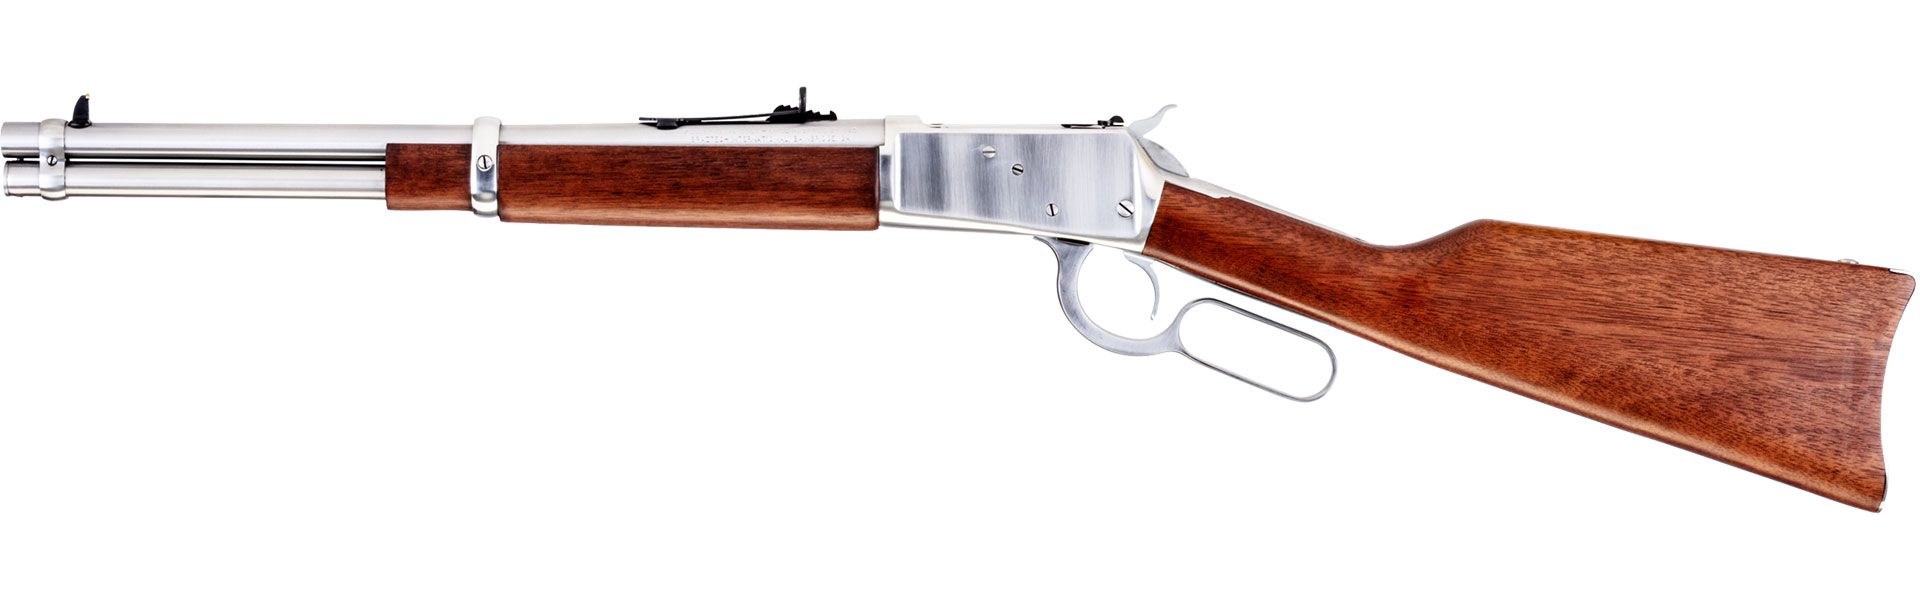 R92 Brazilian Hardwood, .45 COLT, Polished Stainless, 16 In.